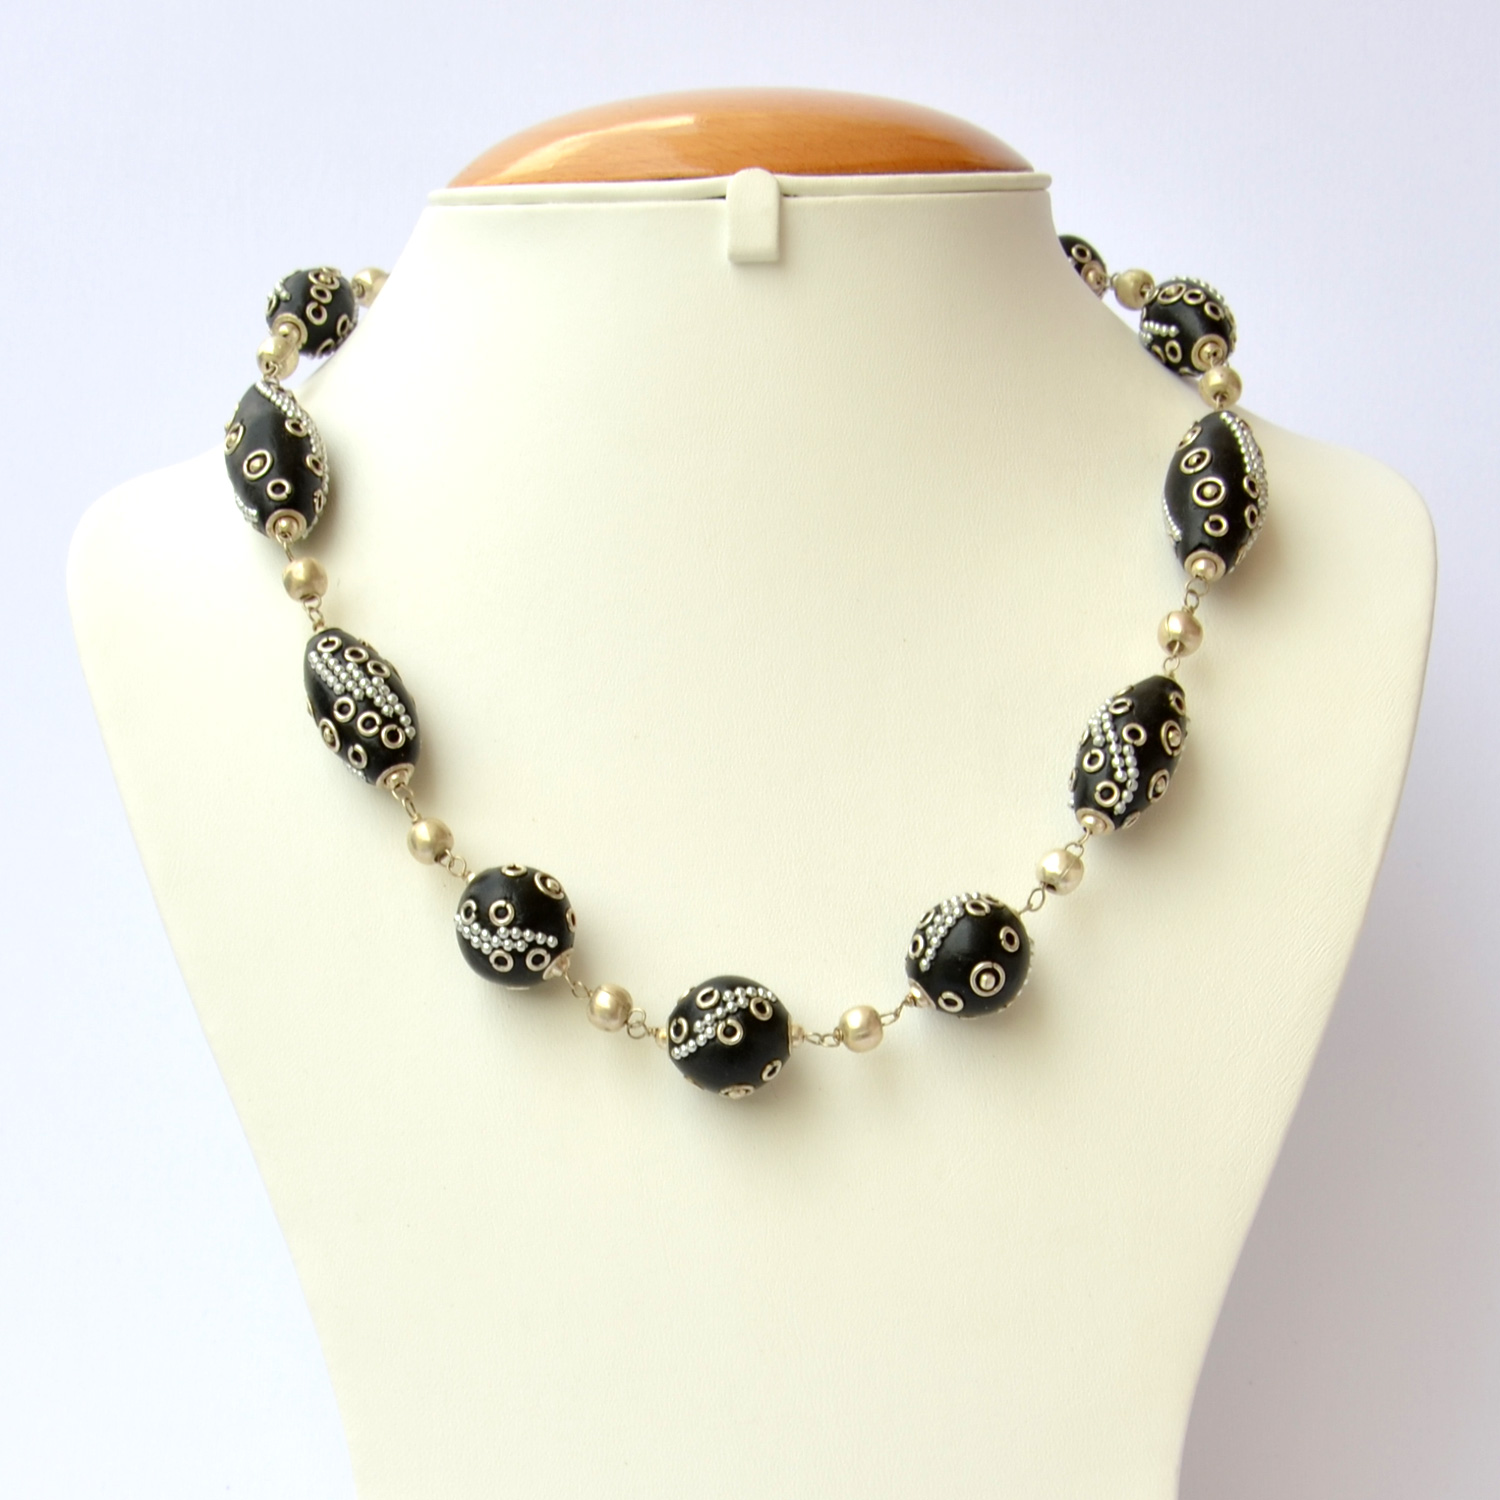 Handmade Necklace with Black Beads having Metal Chains & Rings | Maruti ...